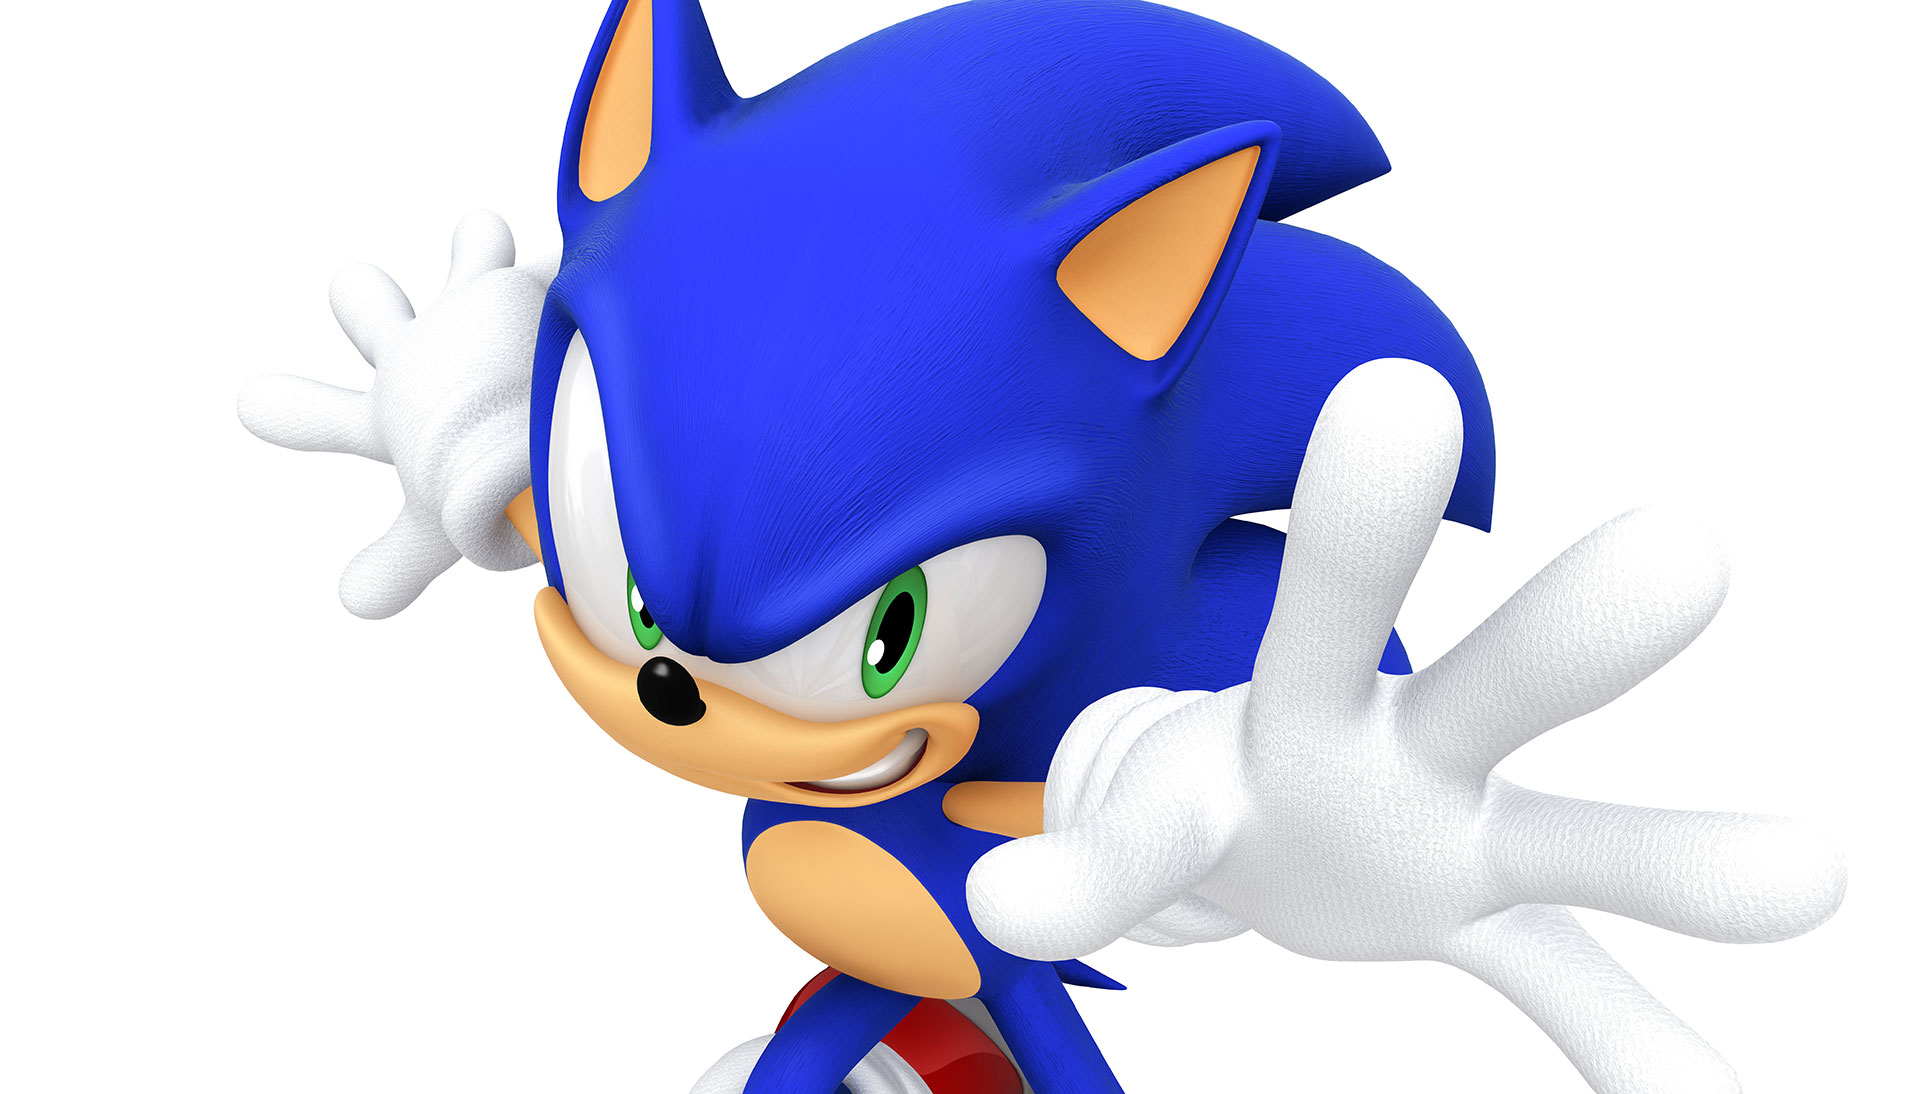 Sonic Prime is the hedgehog's next animated series - Checkpoint